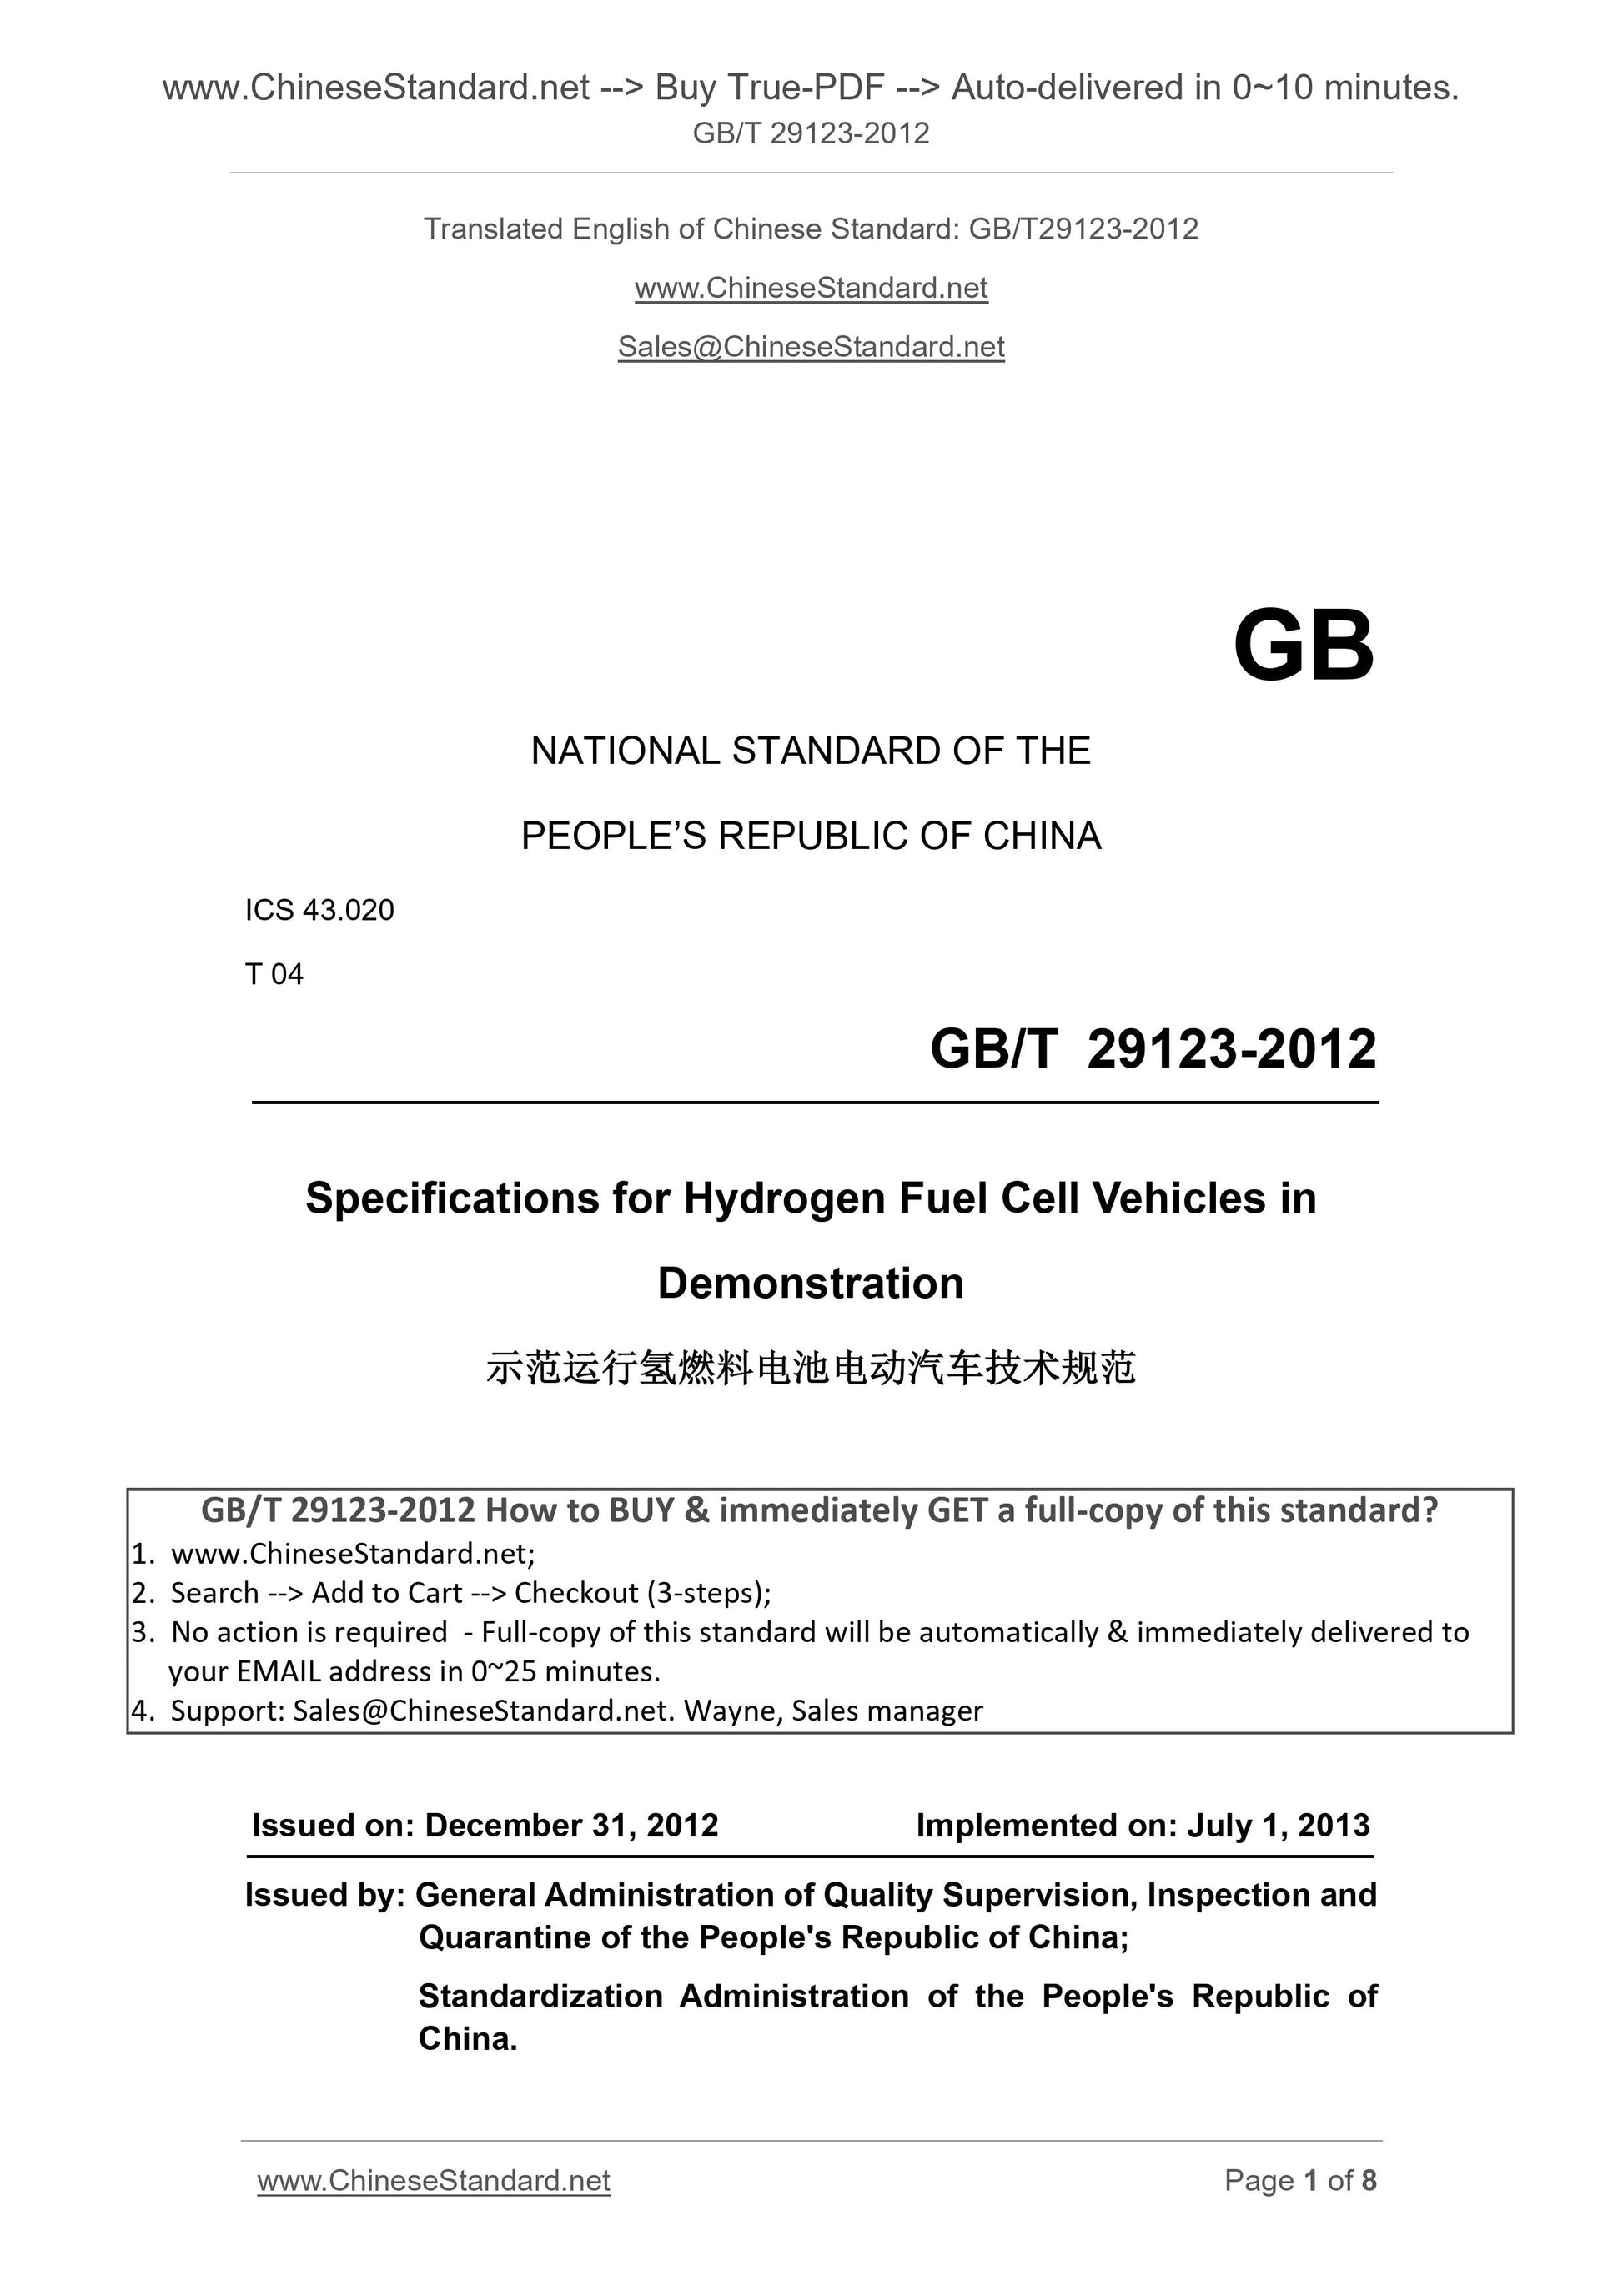 GB/T 29123-2012 Page 1